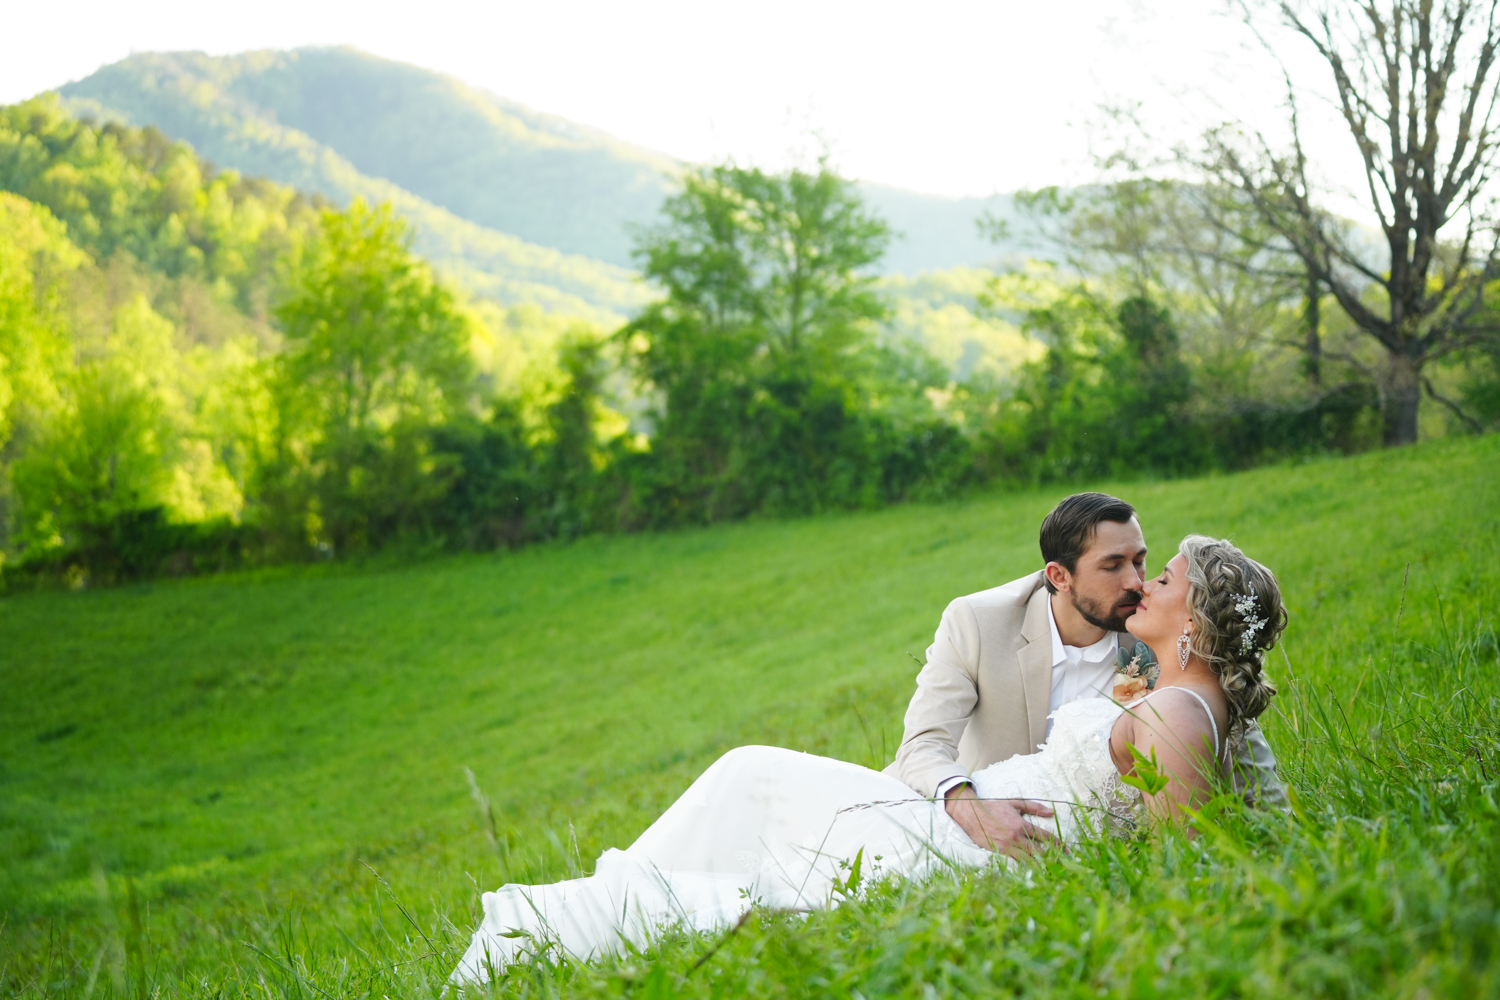 Groom romantically leaning over his bride in a meadow with a mountain view in Pigeon Forge